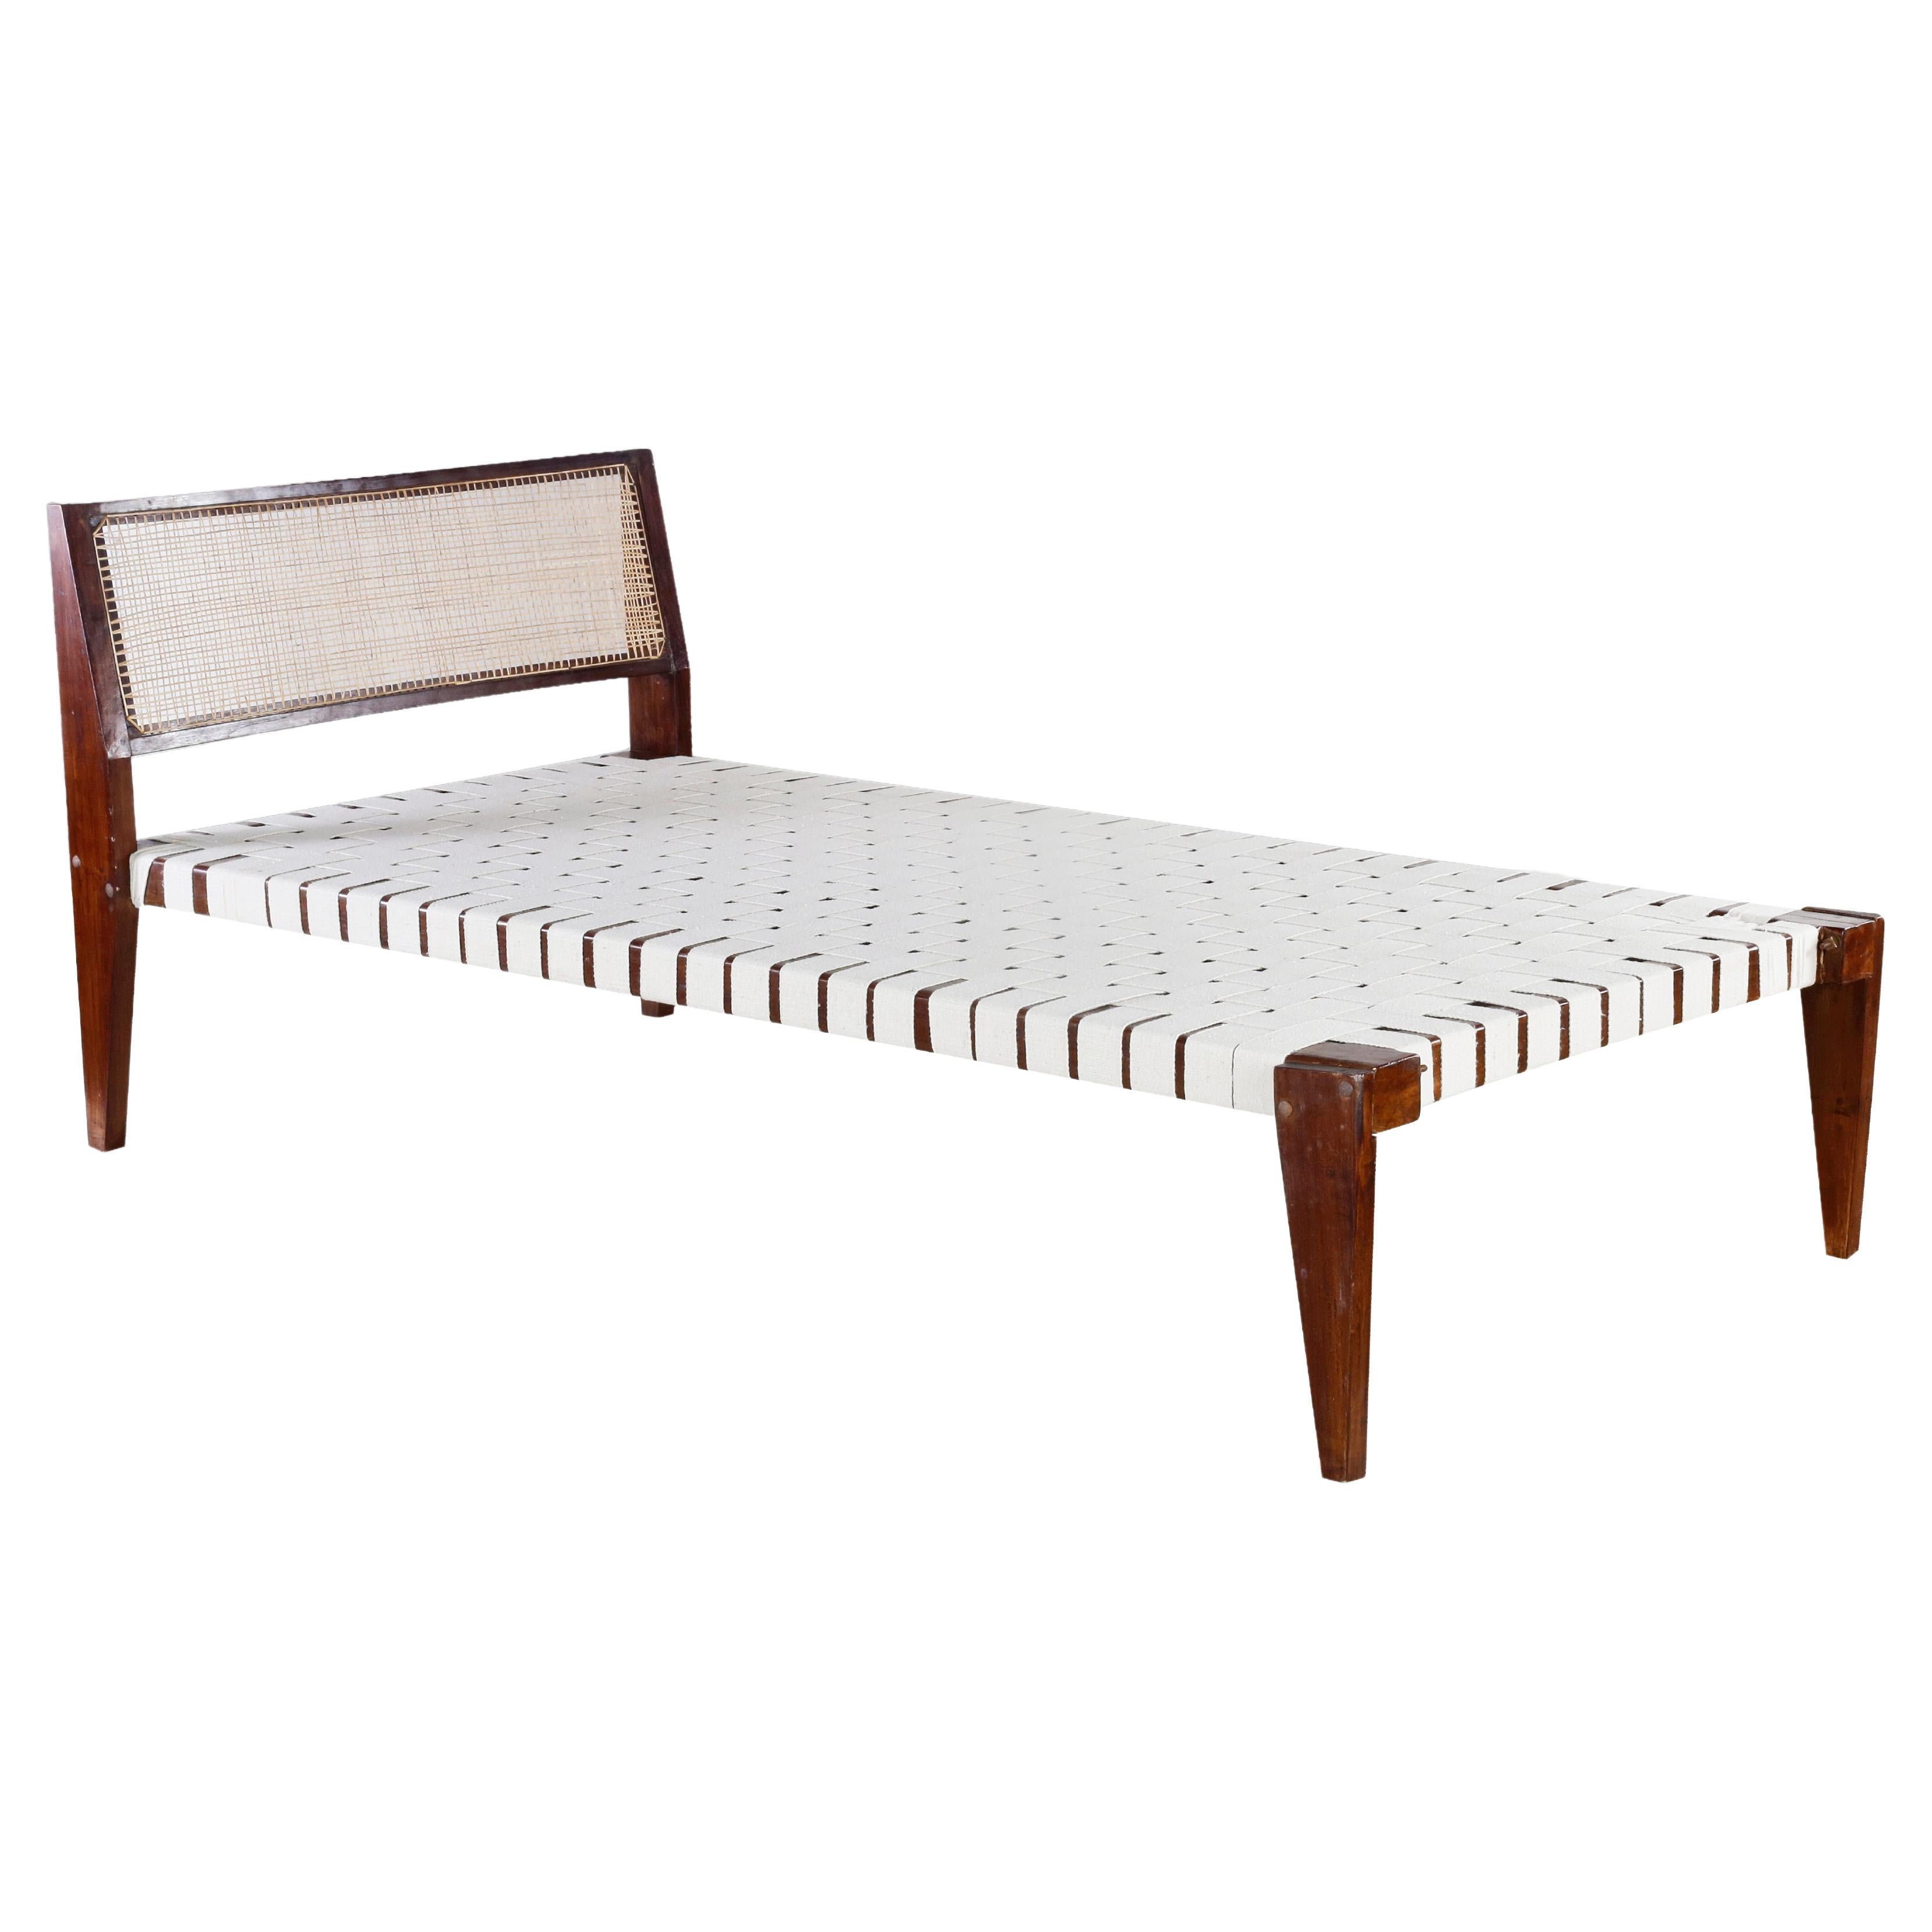 Pierre Jeanneret PJ-L-02-A Collapsible Single Bed / Authentic Mid-Century Modern